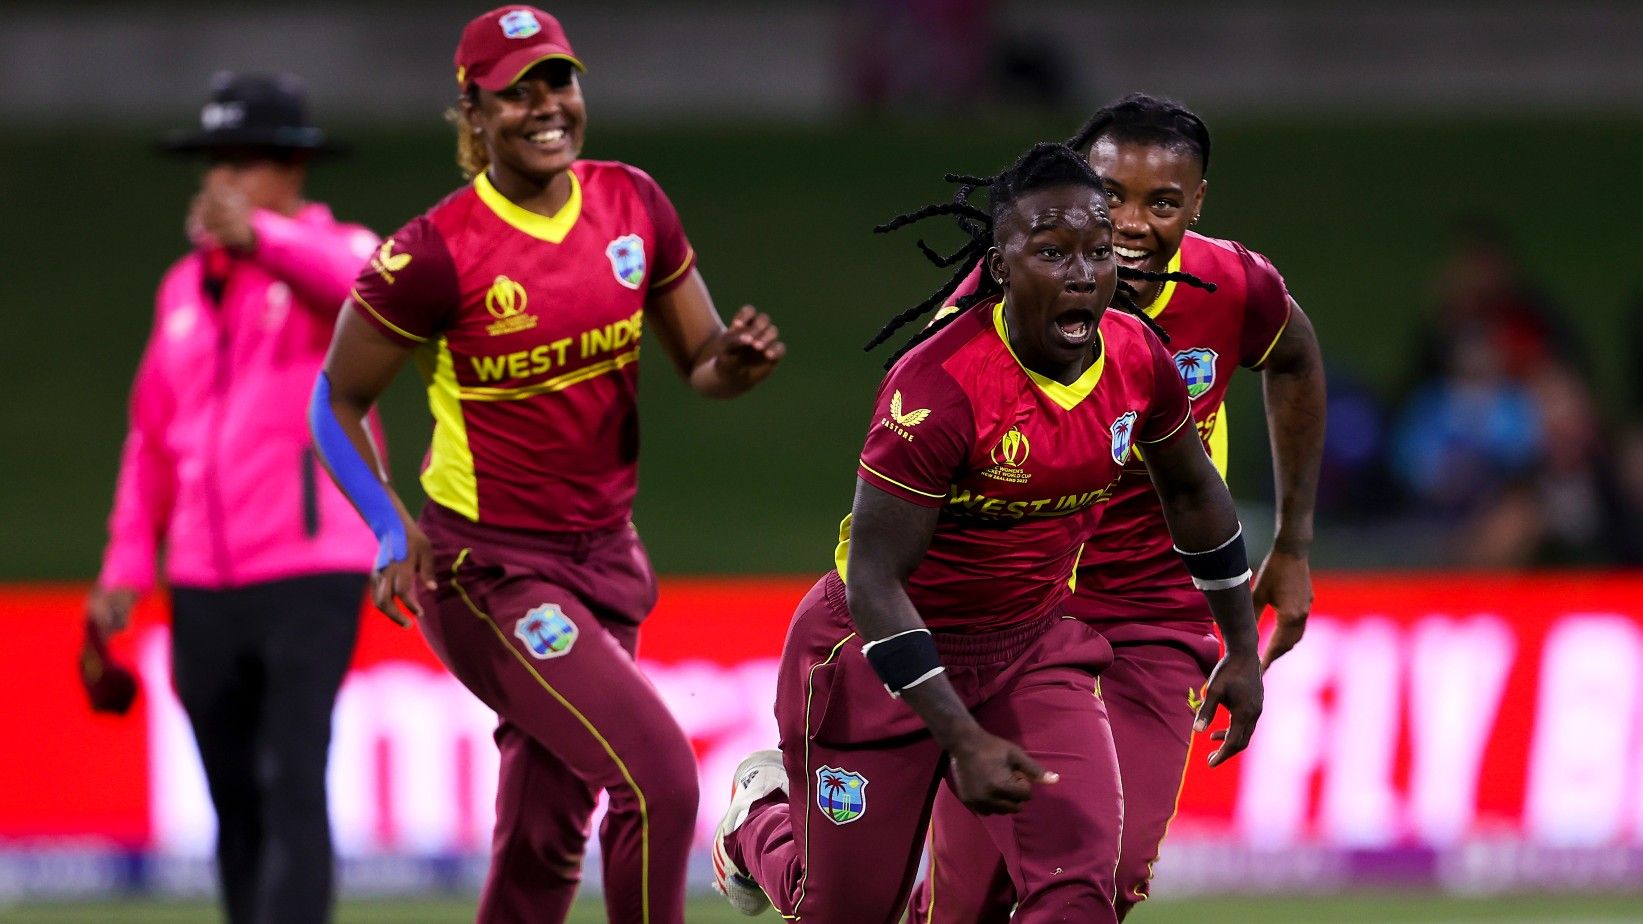 West Indies shock New Zealand in thrilling World Cup opener